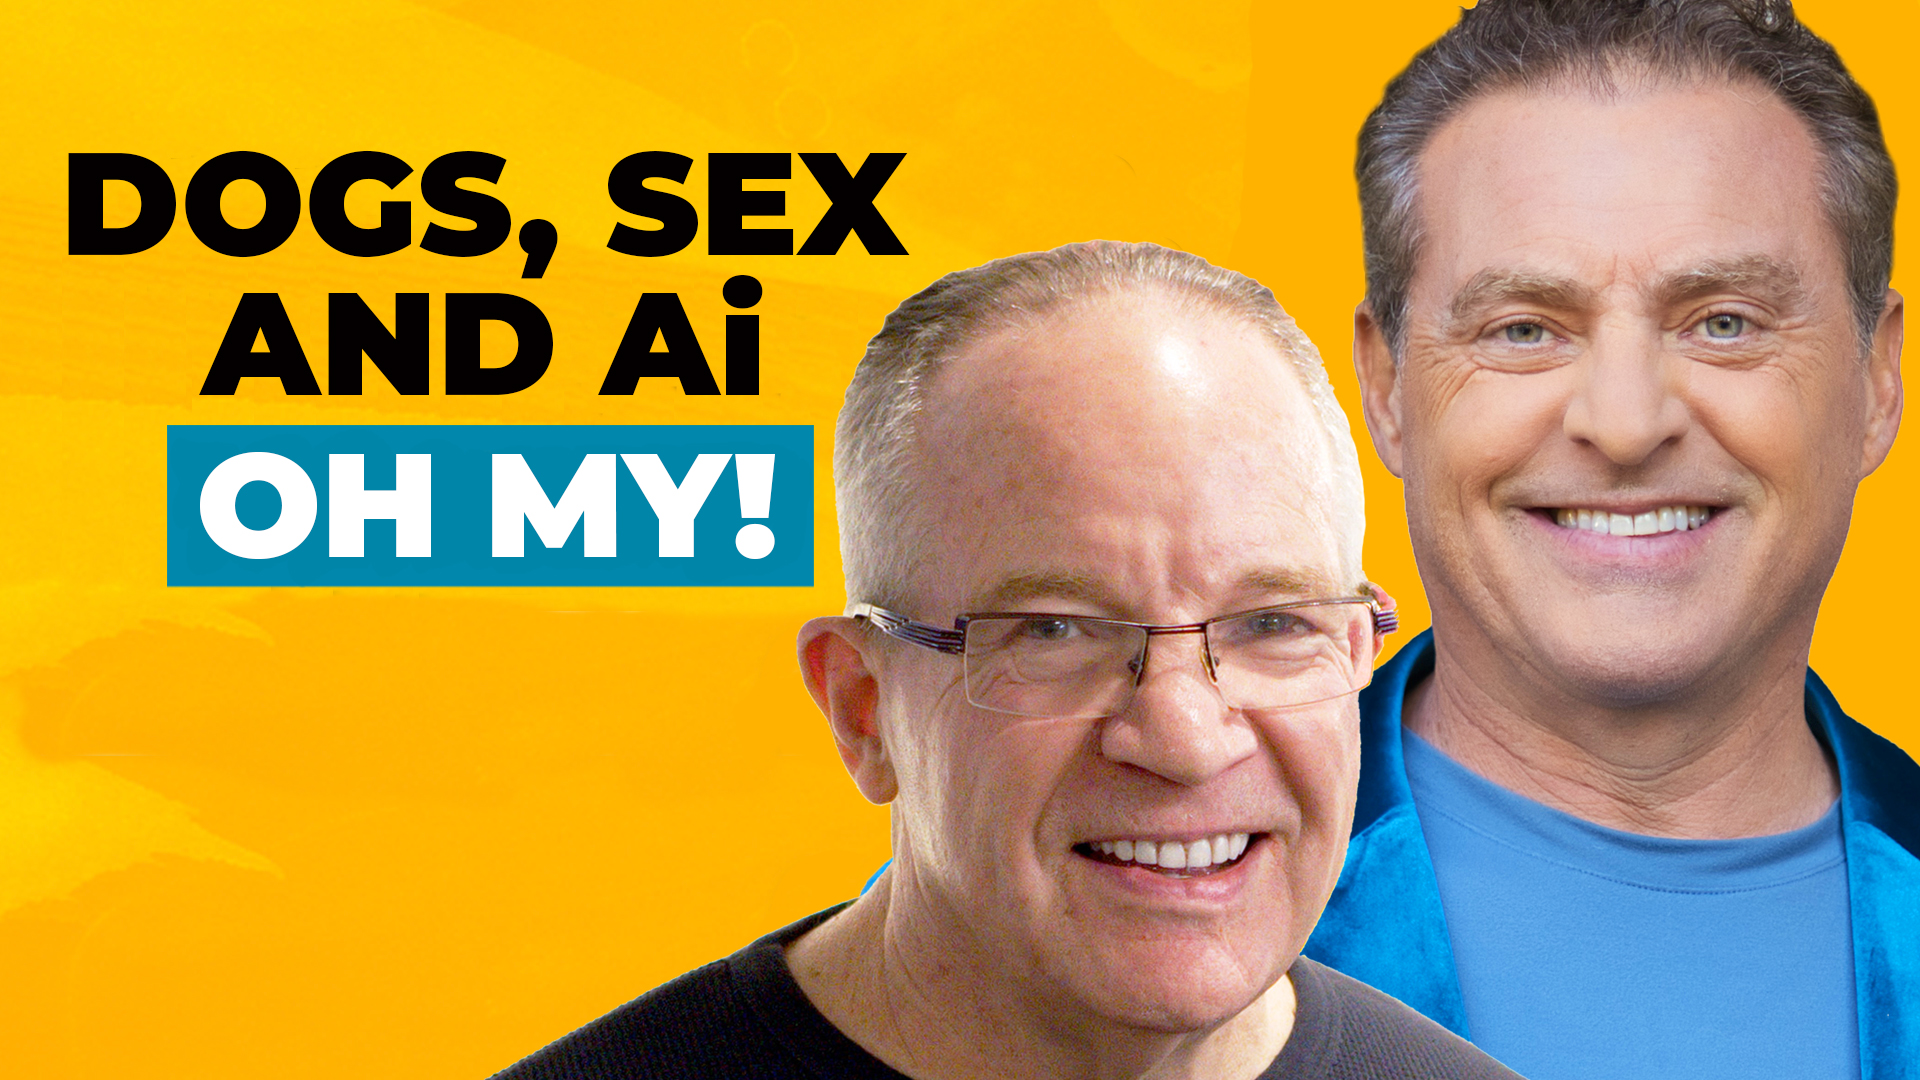 Headshots of Mike Koenigs and Dan Sullivan on a bold yellow background, along with text reading "Dogs, Sex and Ai, OH MY!"